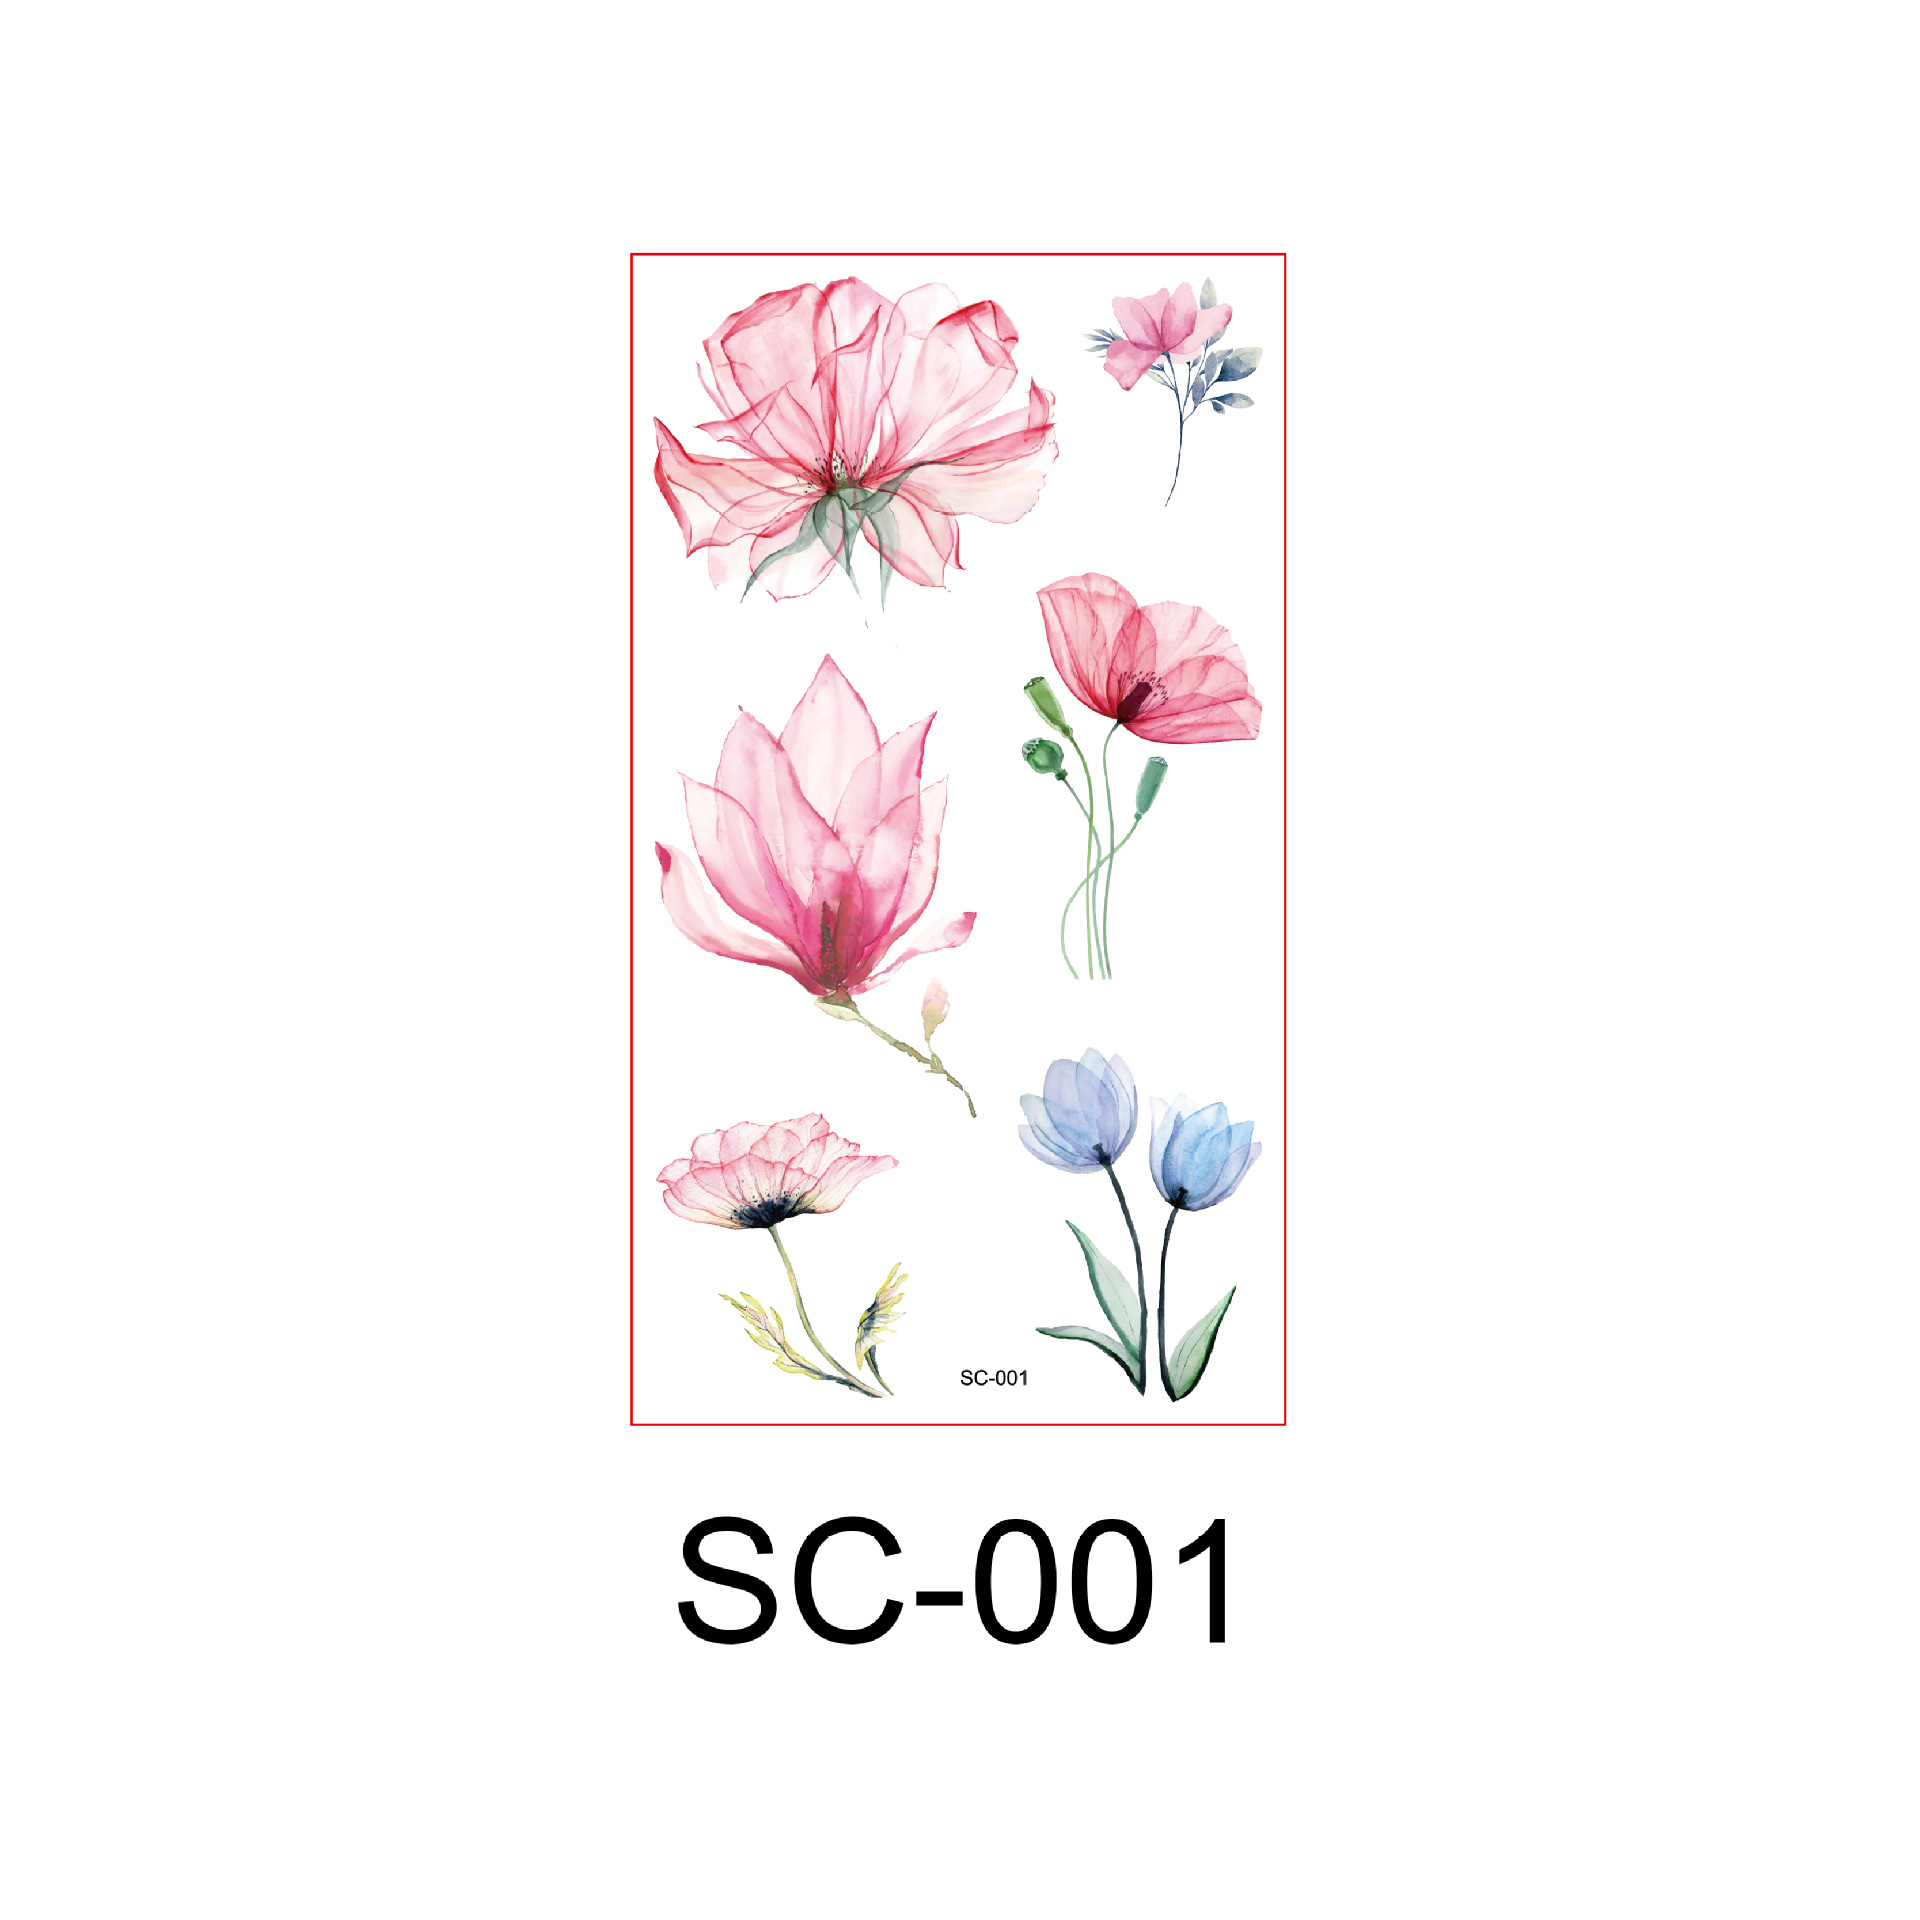 Watercolor Fresh Flowers Antique Style Tattoo Sticker Paper Hand Back Clavicle Chest European and American Scar Covering Flower Arm Tattoo Sticker